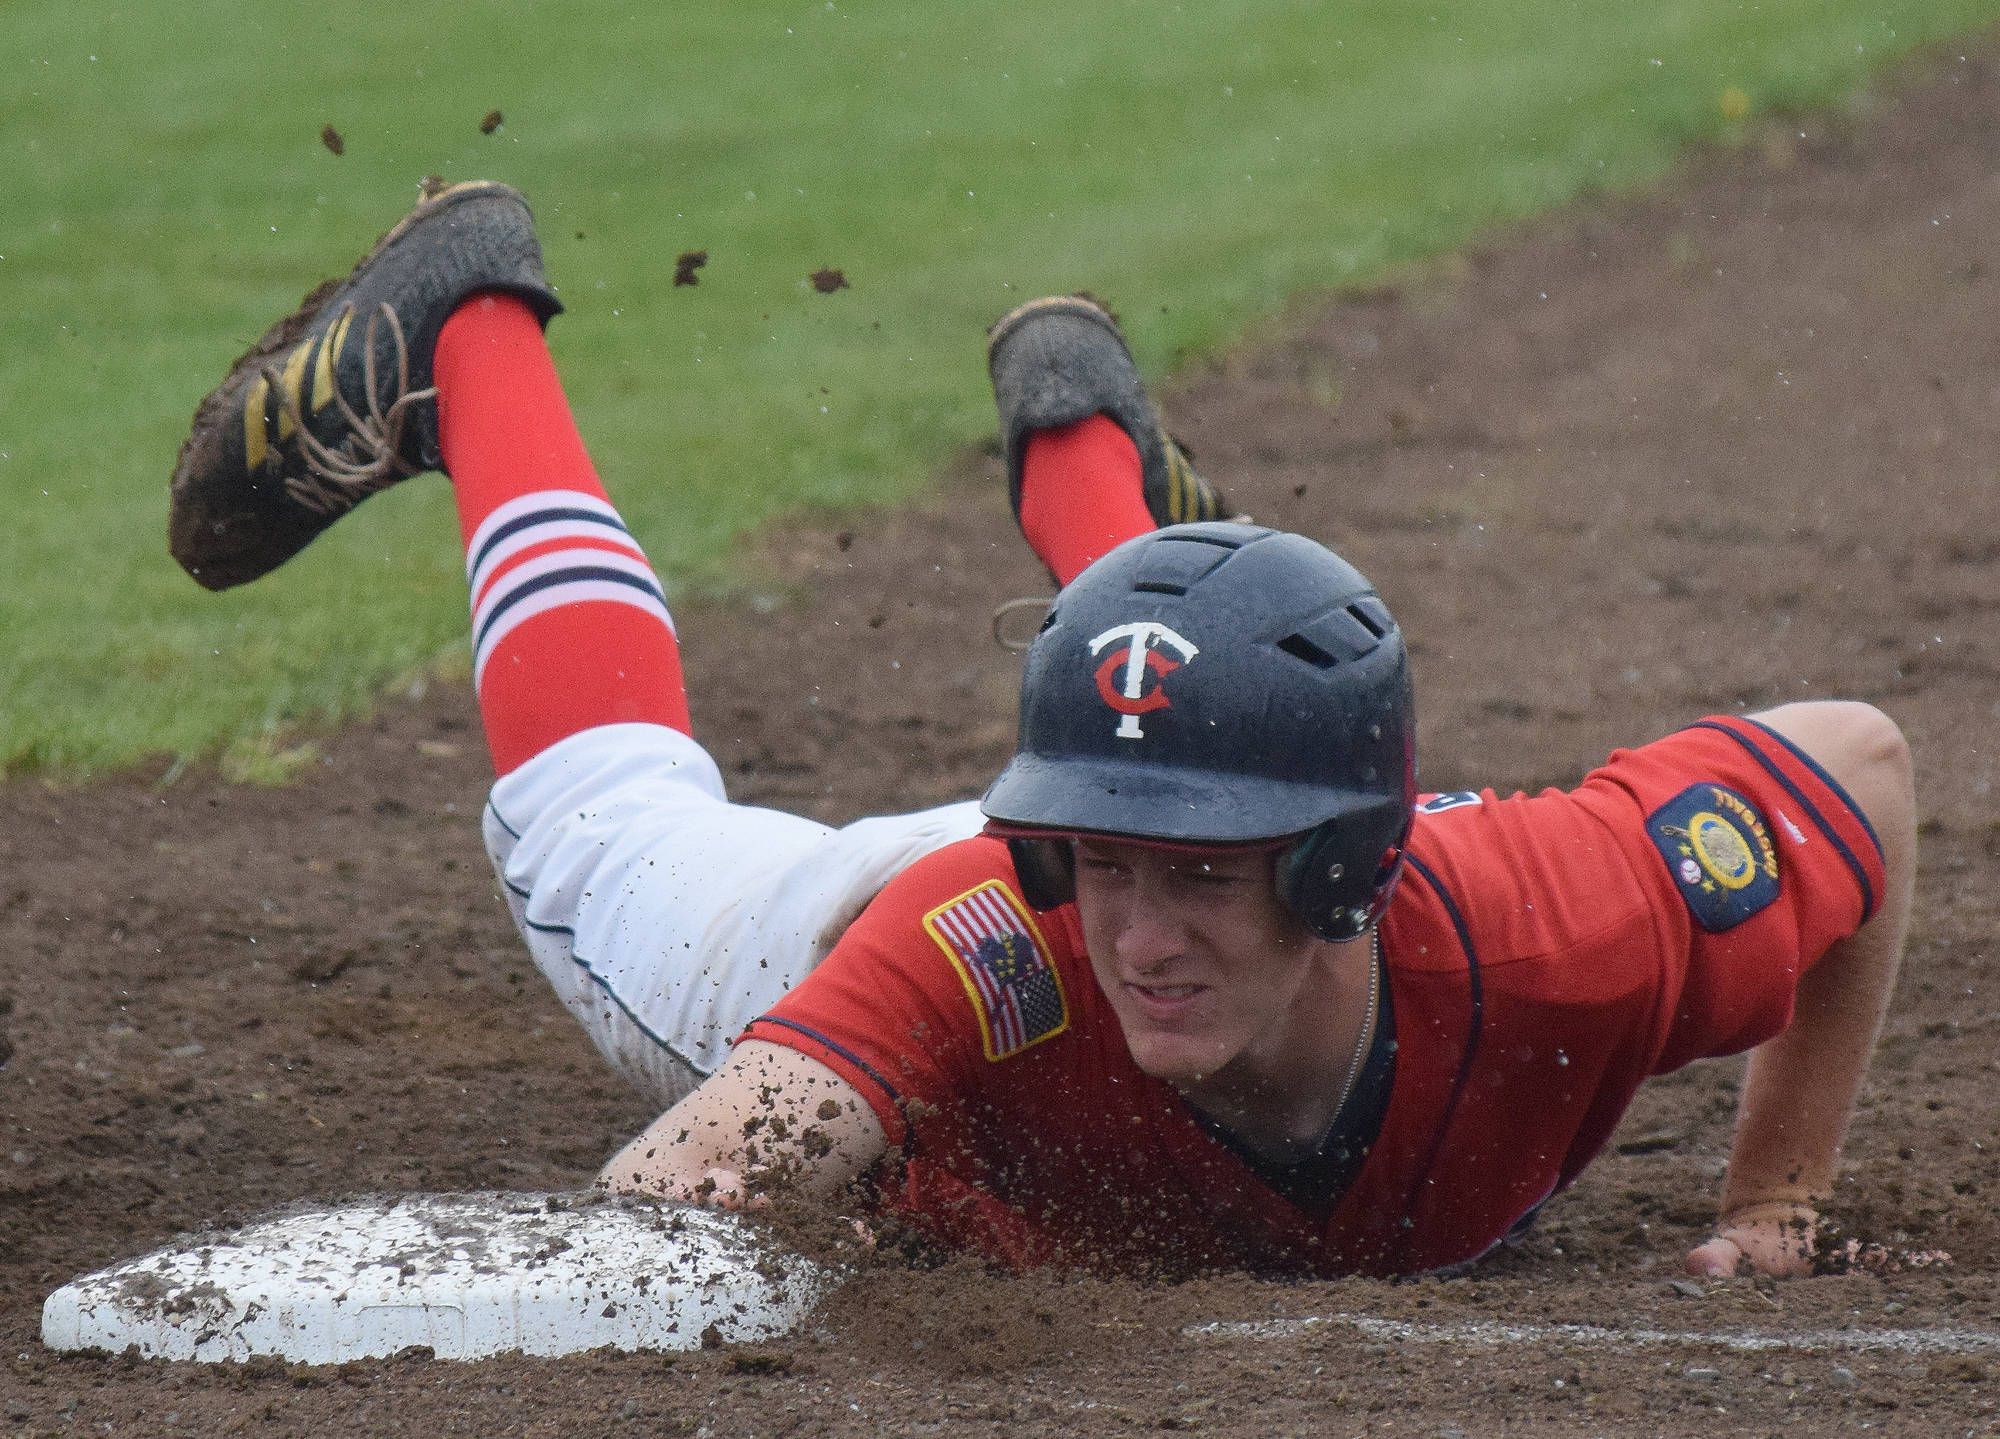 Twins catcher Cody Quelland tags to first base Friday afternoon against Service at Coral Seymour Memorial Ballpark in Kenai. (Photo by Joey Klecka/Peninsula Clarion)